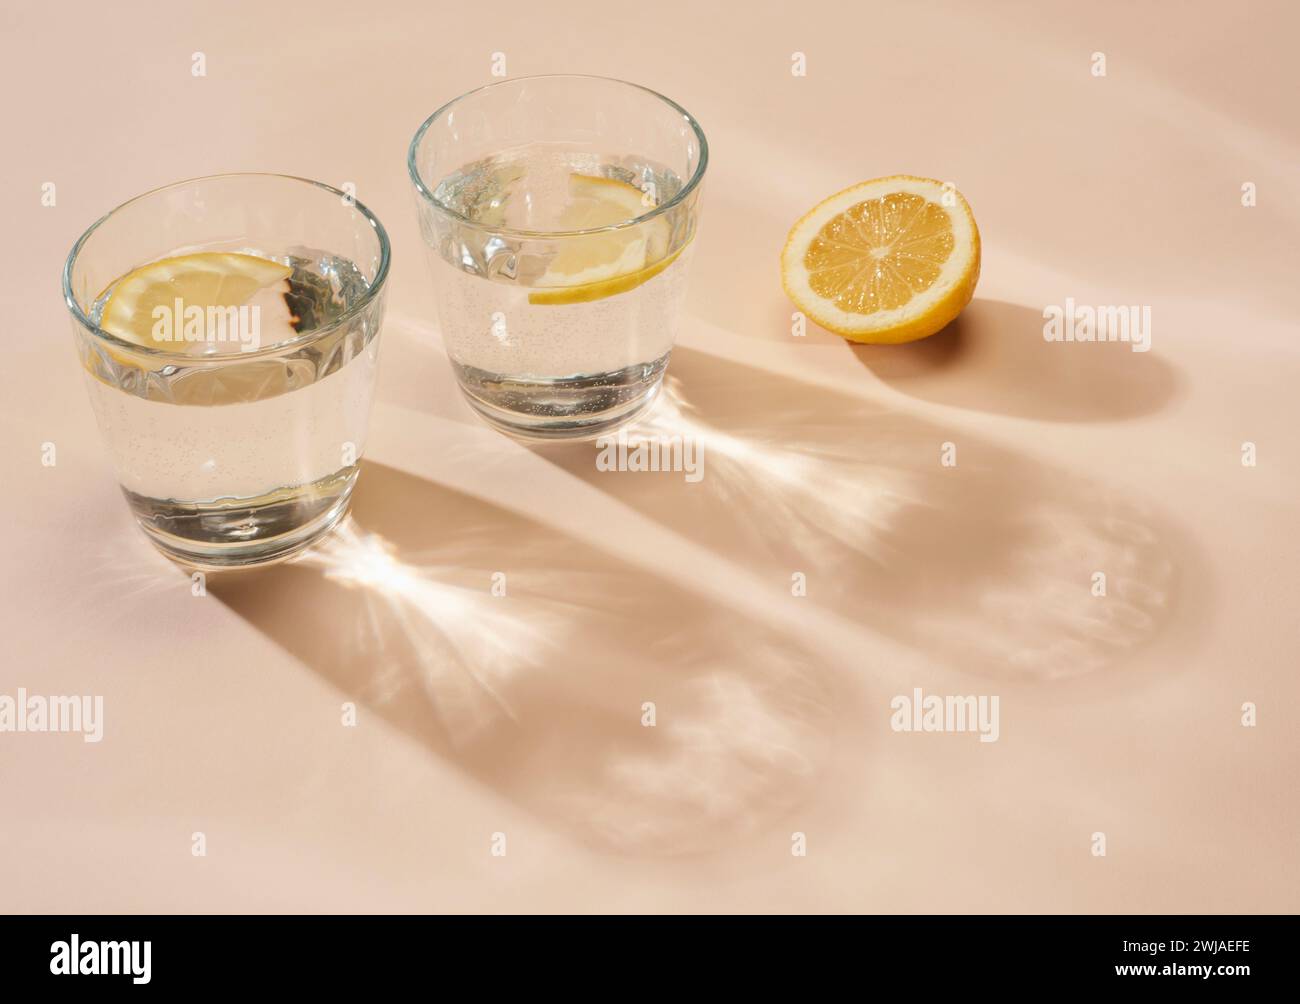 Glasses of water with sliced lemon on a cream coloured background, with shadows Stock Photo